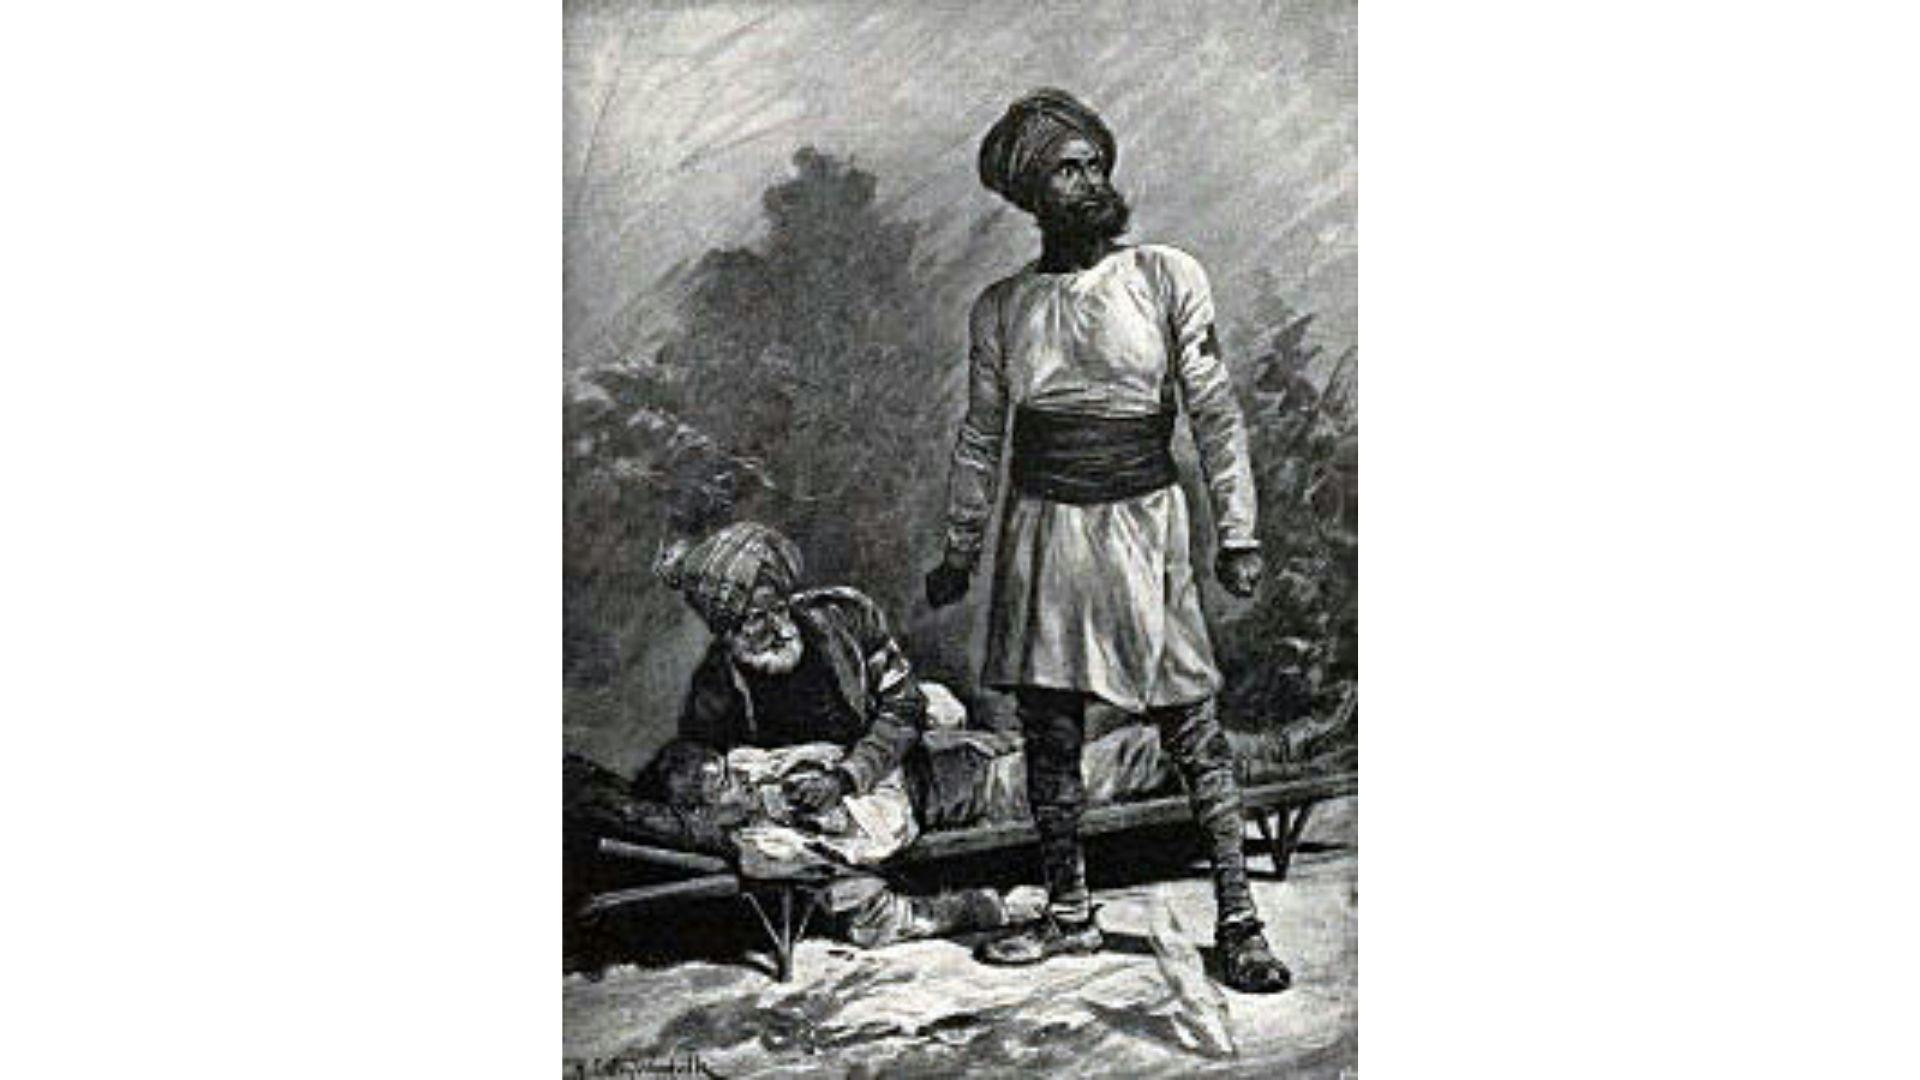 Indian Stretcher Bearers of the unit led by Mahatma Gandhi